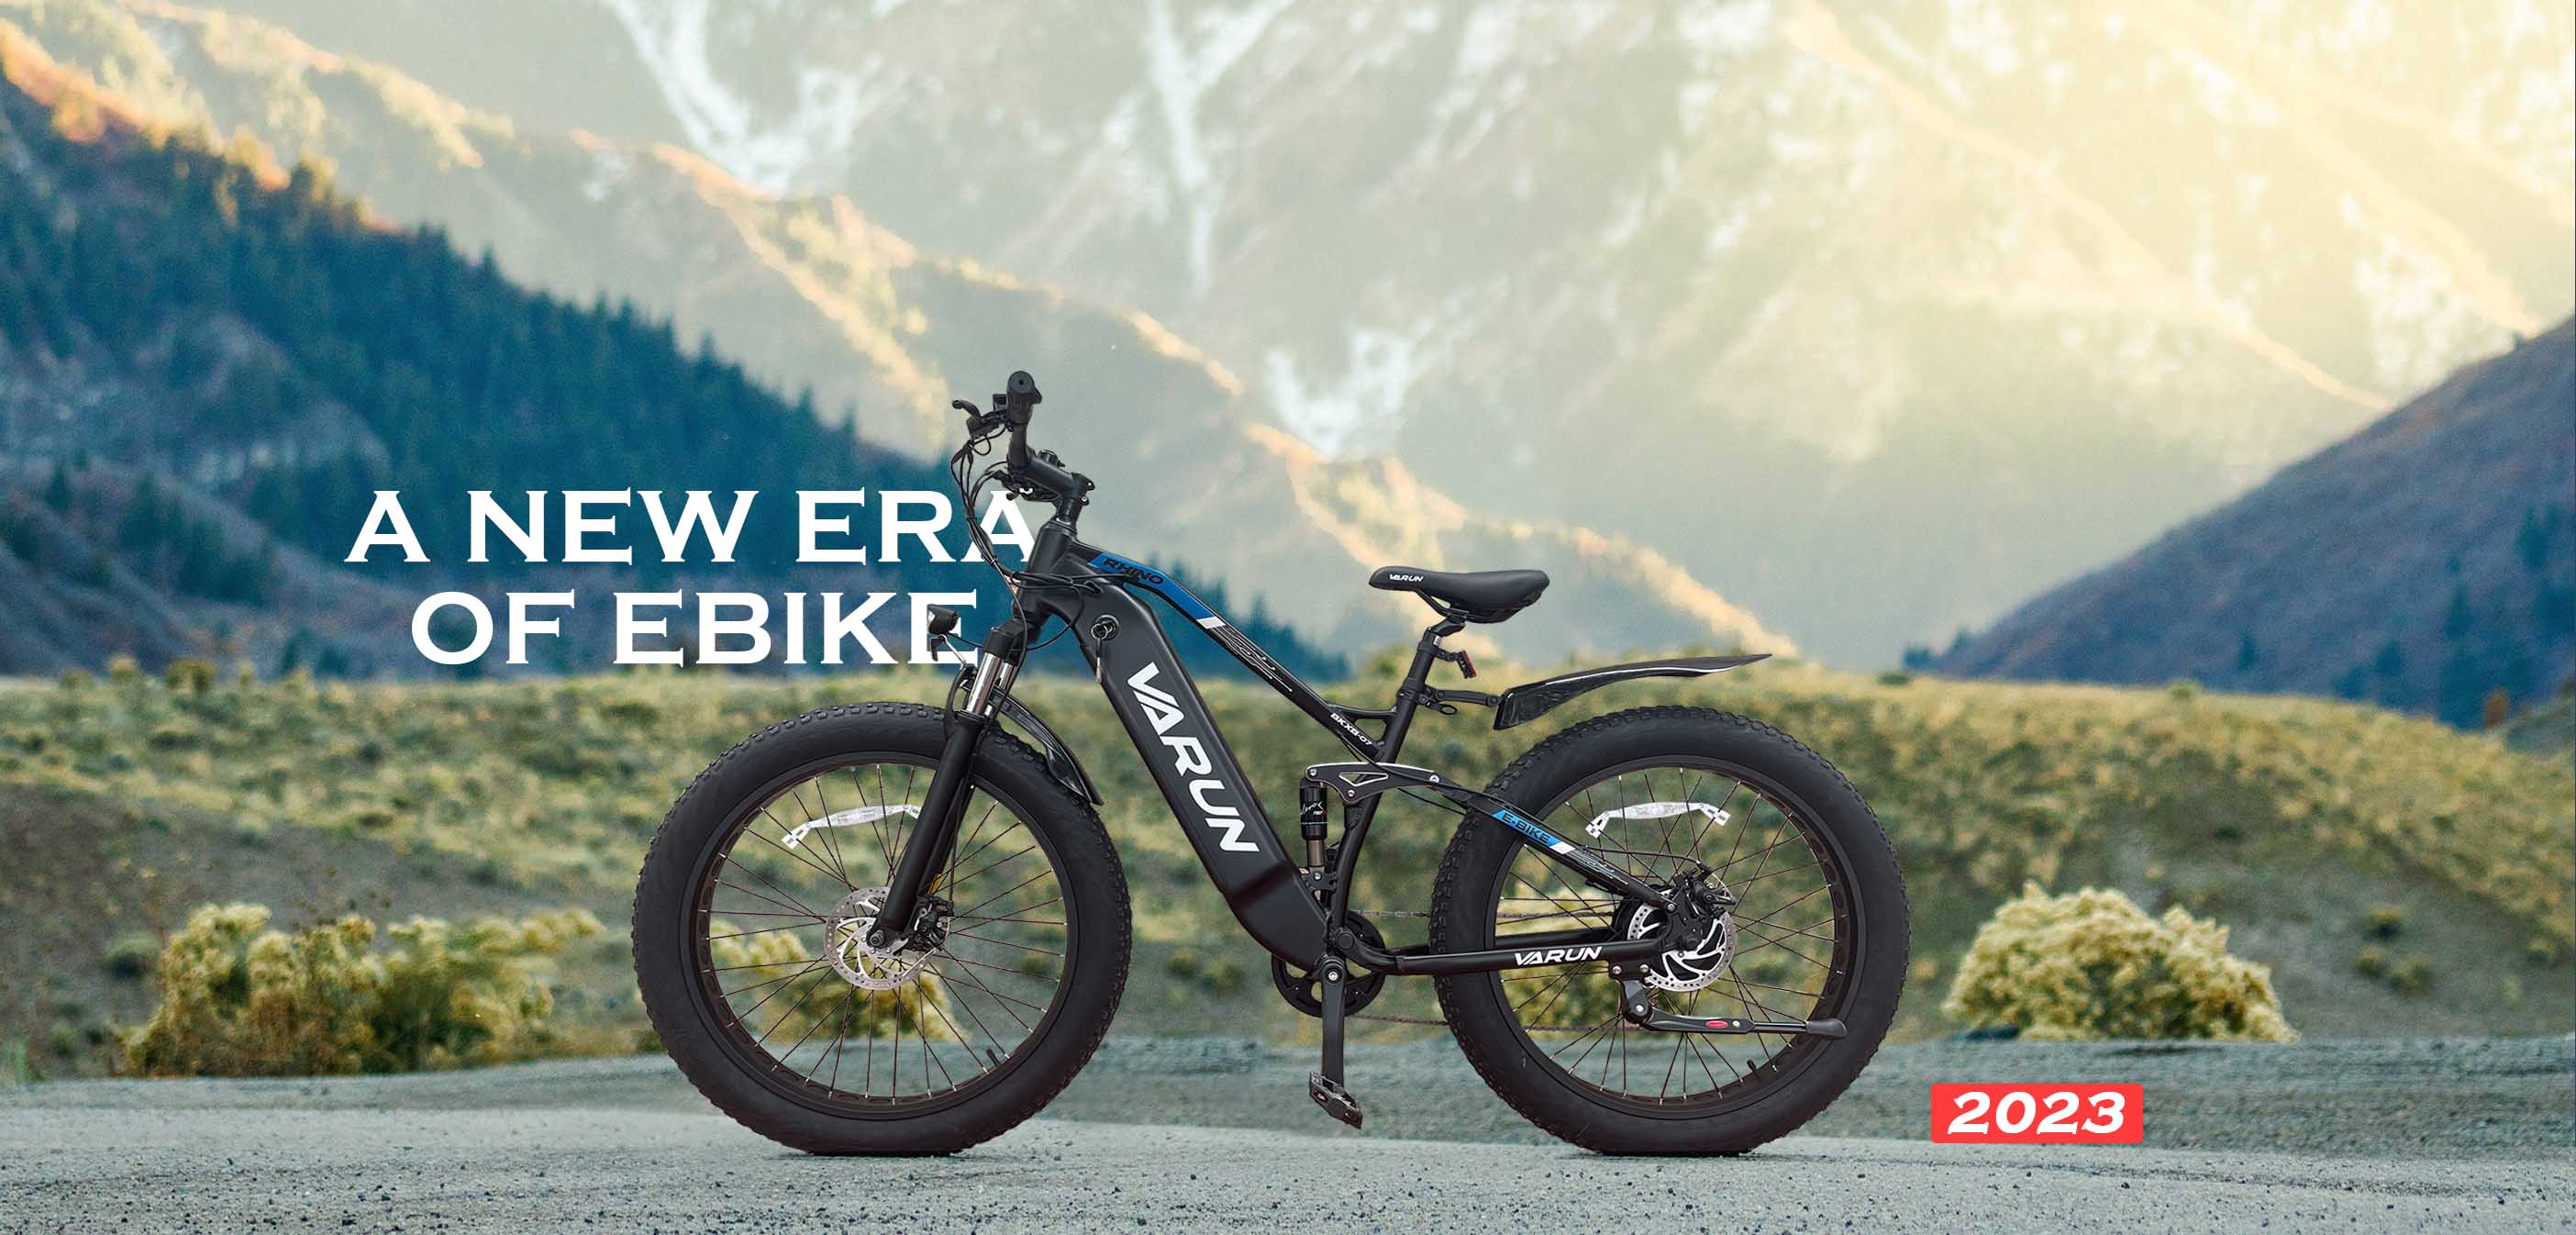 2. WHY ARE FAT TIRE ELECTRIC BICYCLES GAINING POPULARITY AMONG AN INCREASING NUMBER OF PEOPLE?